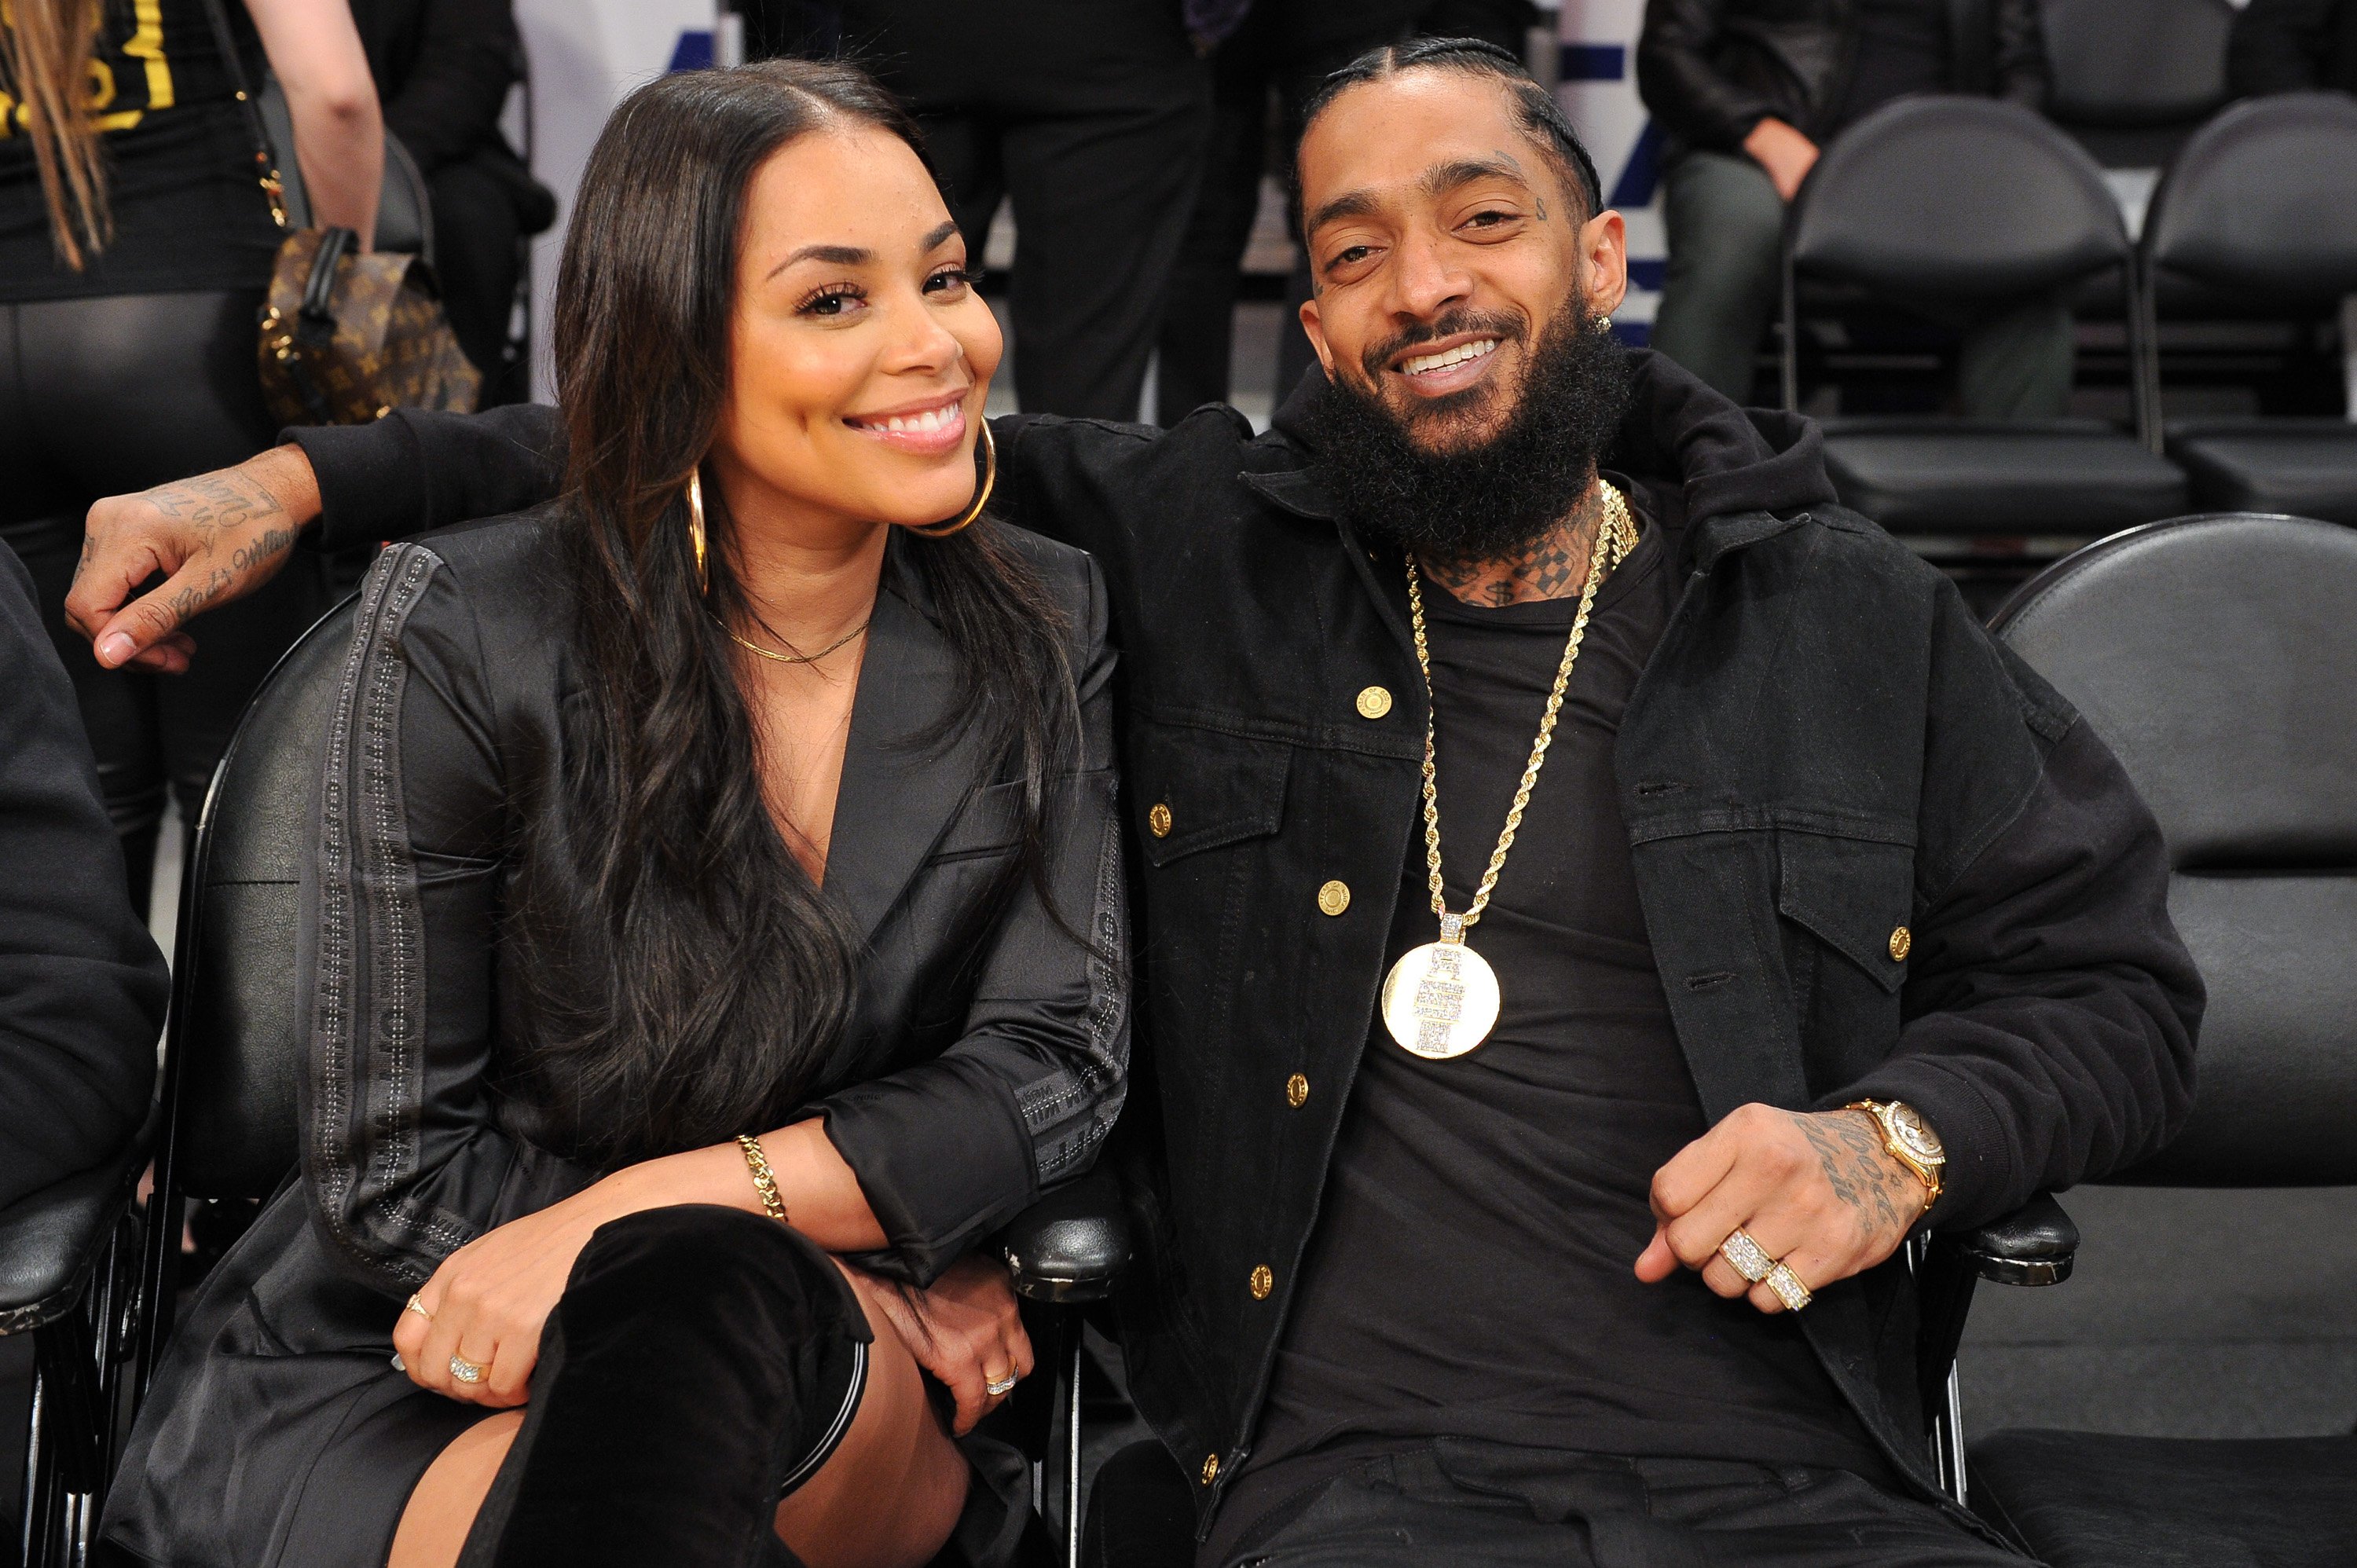 Nipsey Hussle and Lauren London attend a basketball game at Staples Center on November 14, 2018 in Los Angeles, California. | Source: Getty Images